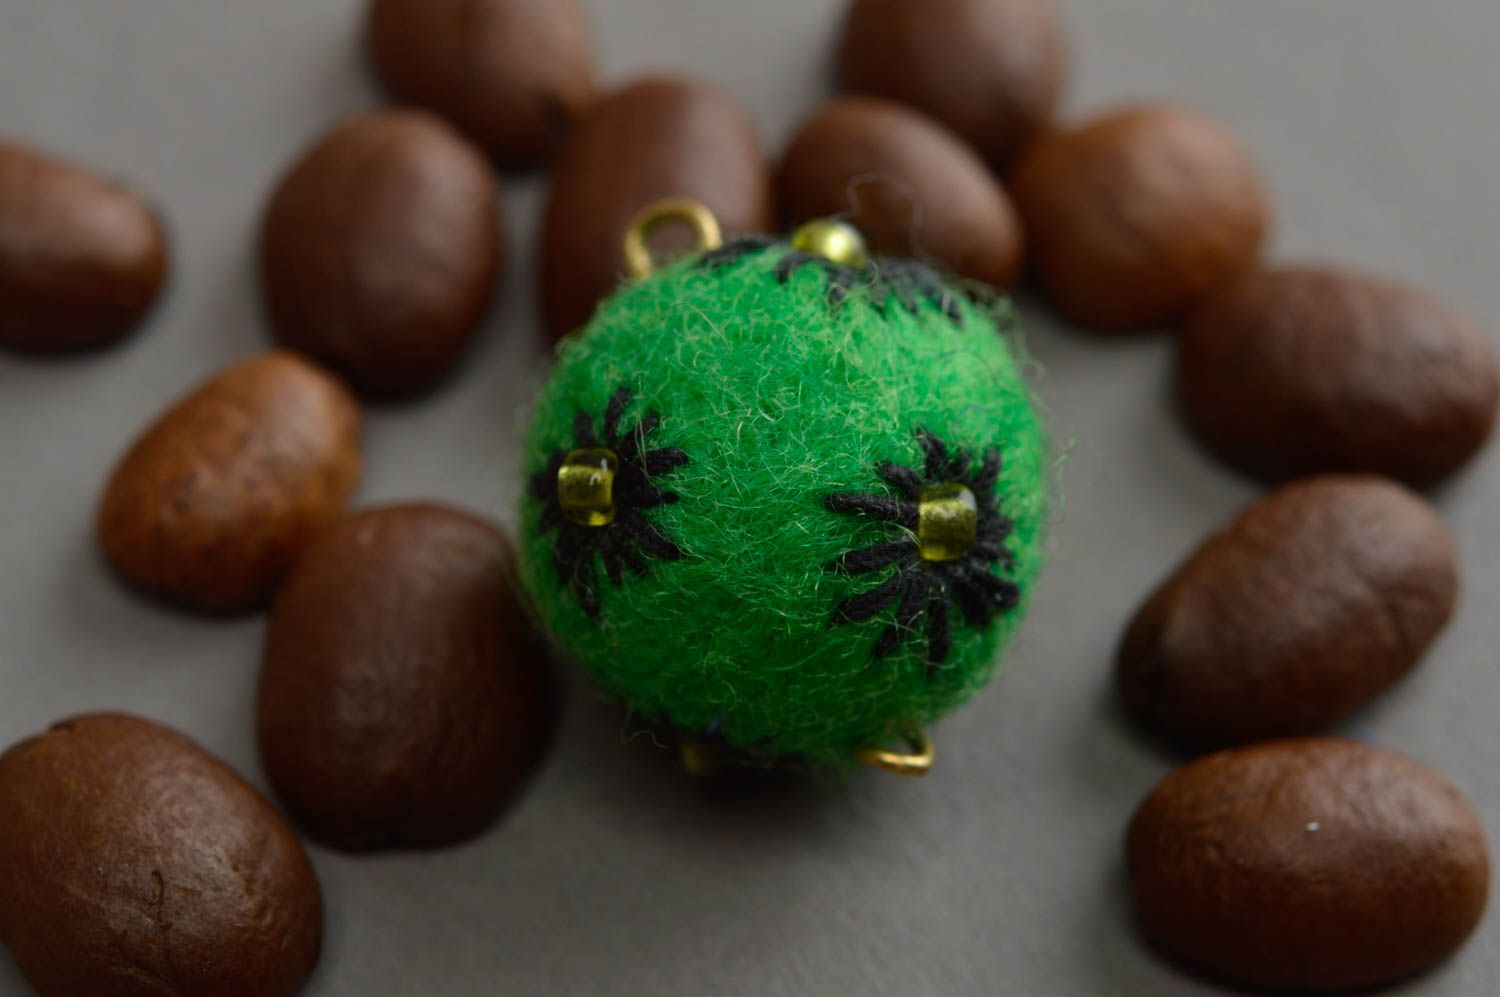 Handmade felted wool ball pendant diy jewelry making ideas gifts for her photo 1